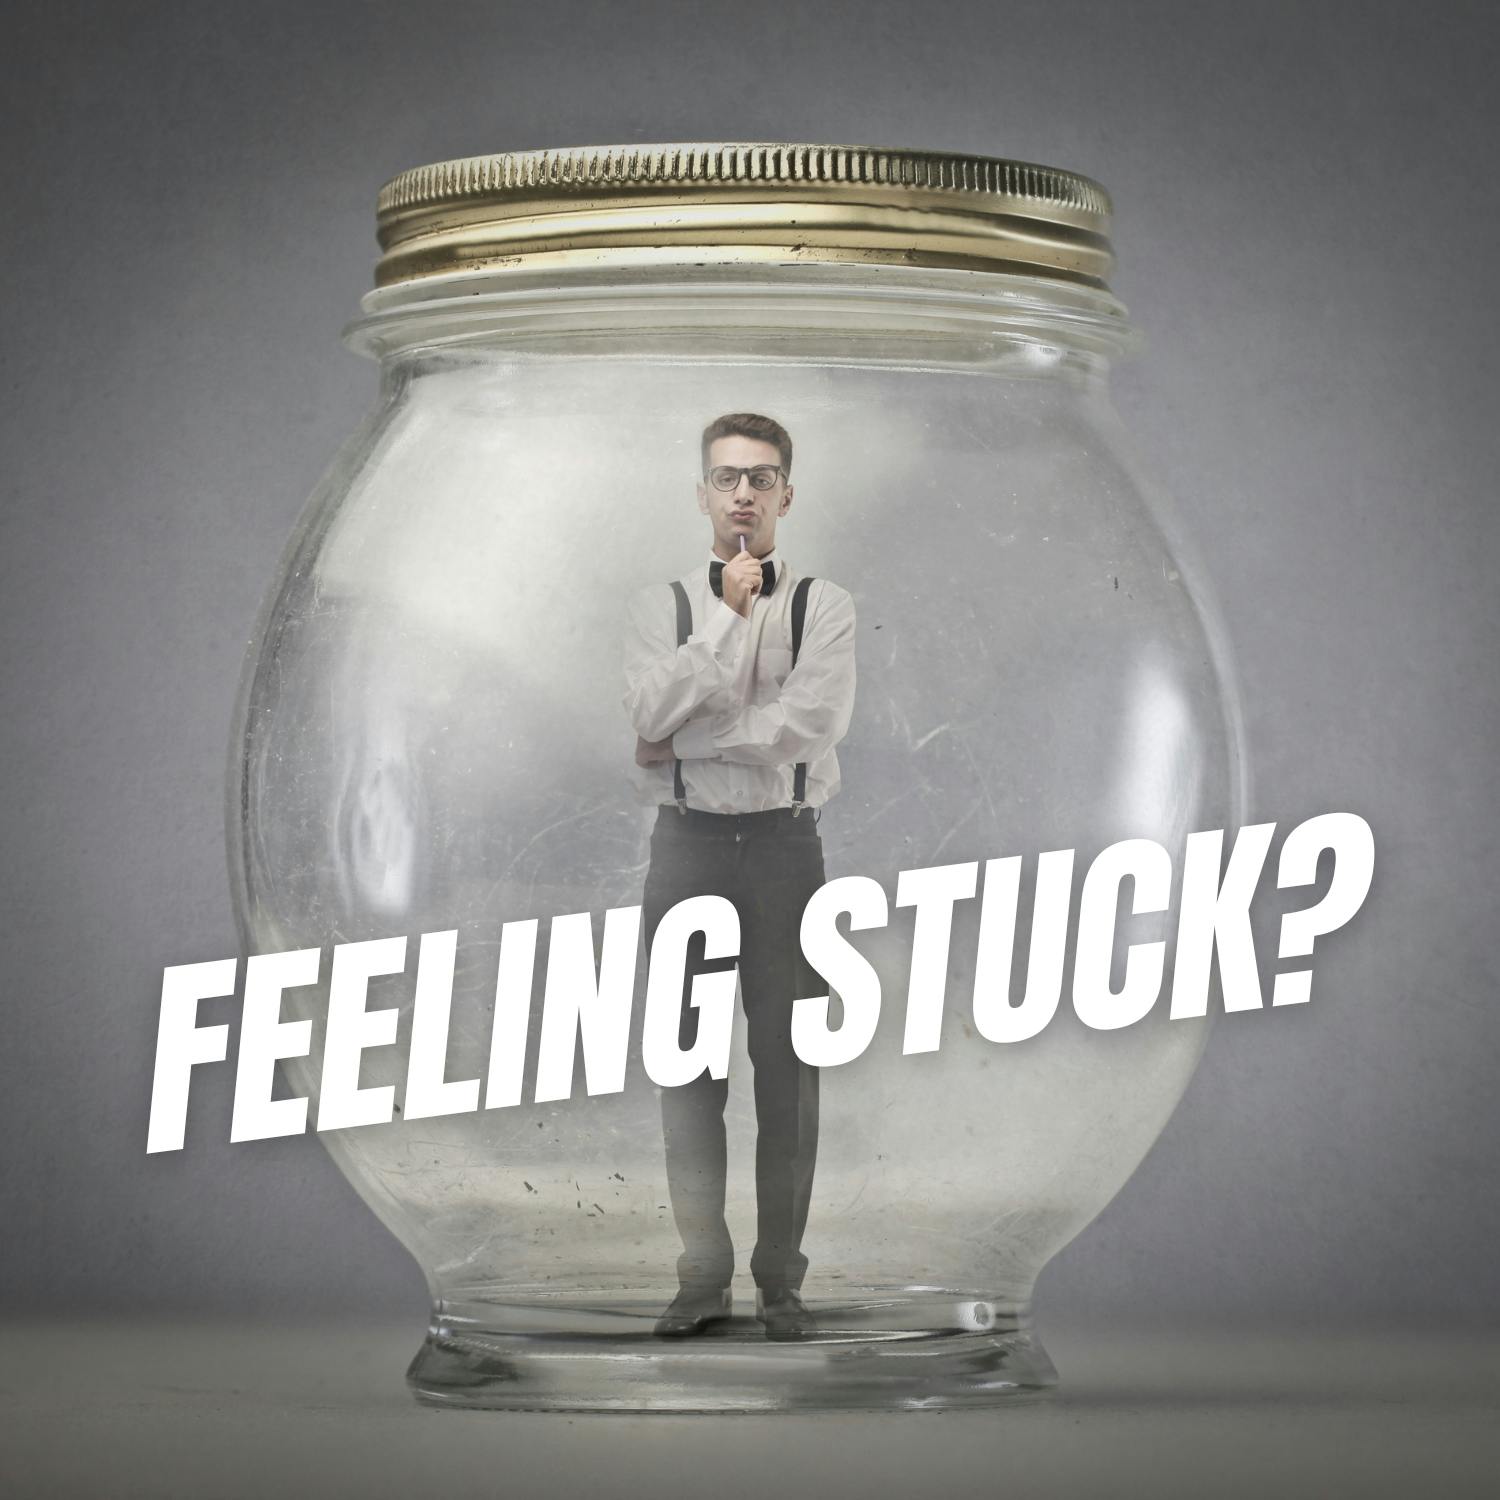 How to Find New Solutions When You're Feeling Stuck